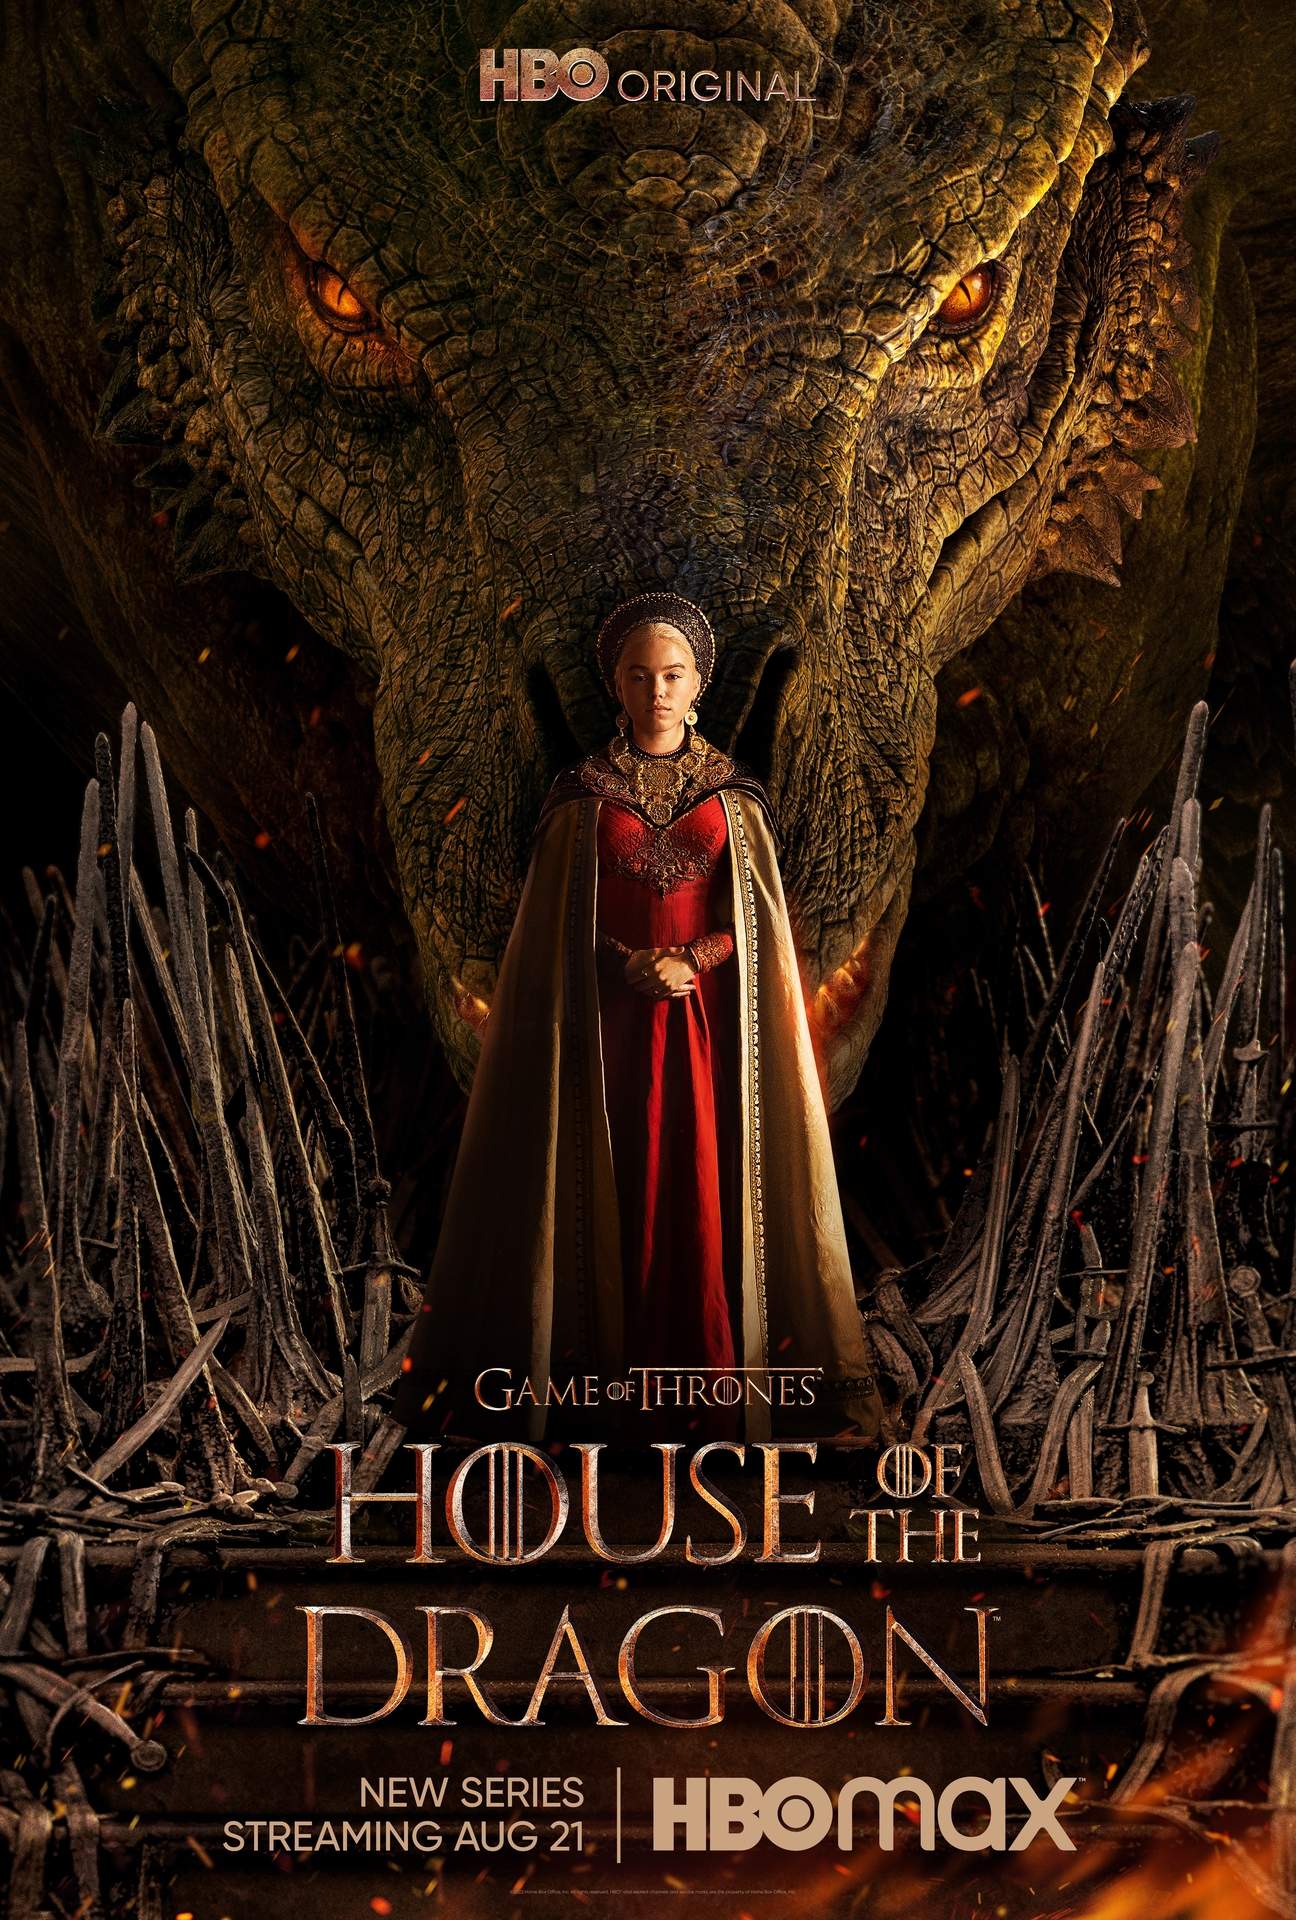 houseofthedragoncover.jpg